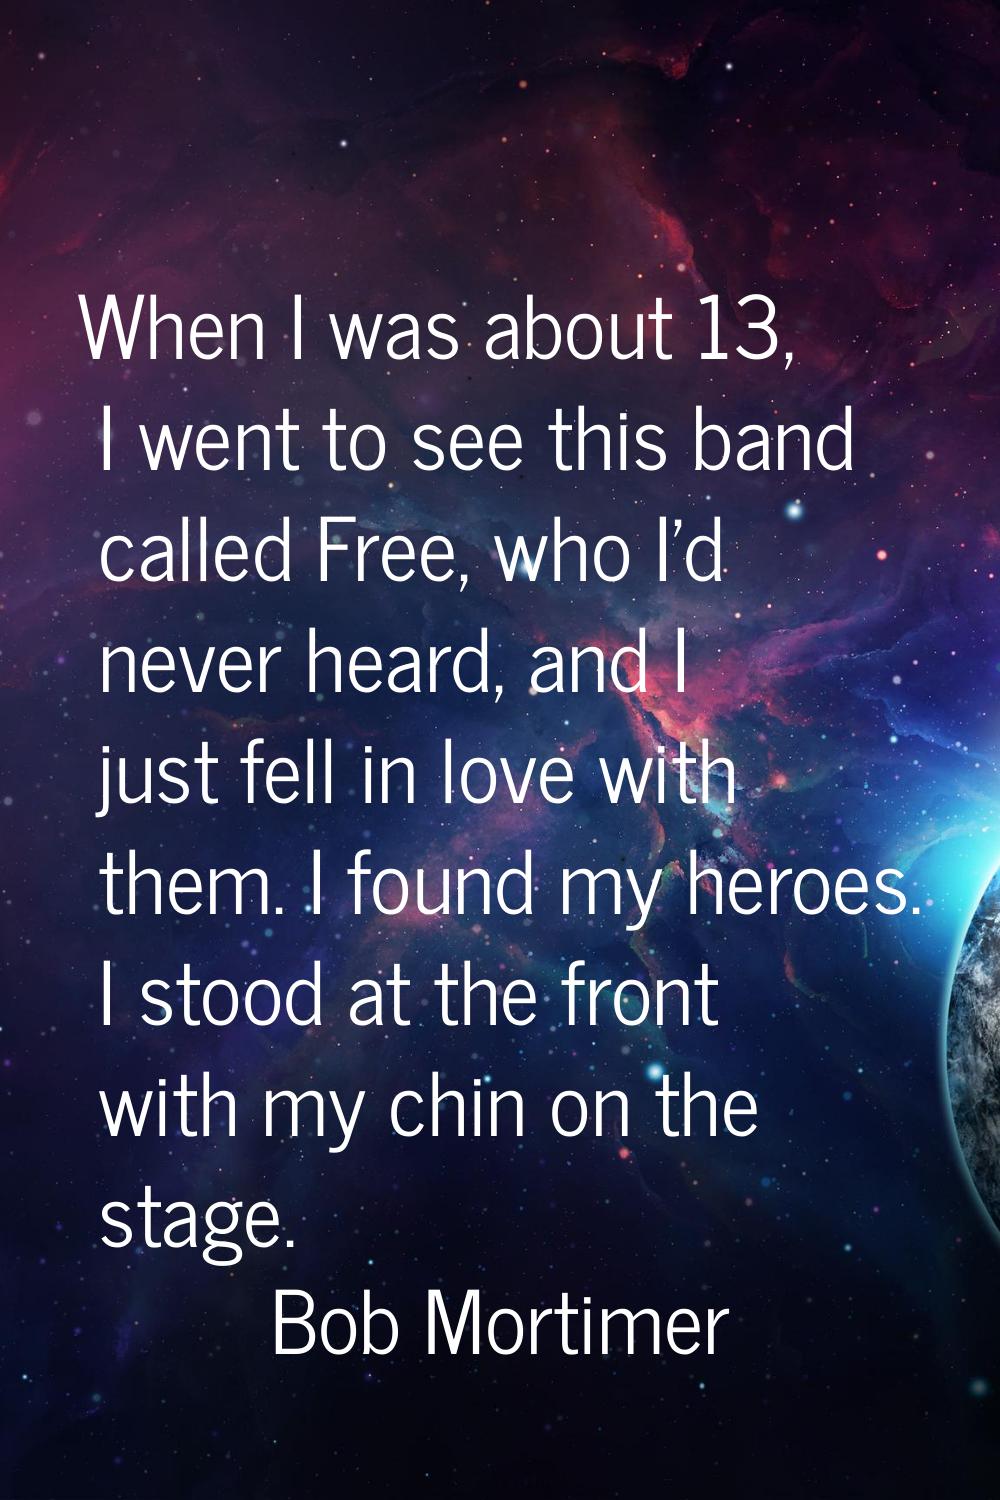 When I was about 13, I went to see this band called Free, who I'd never heard, and I just fell in l